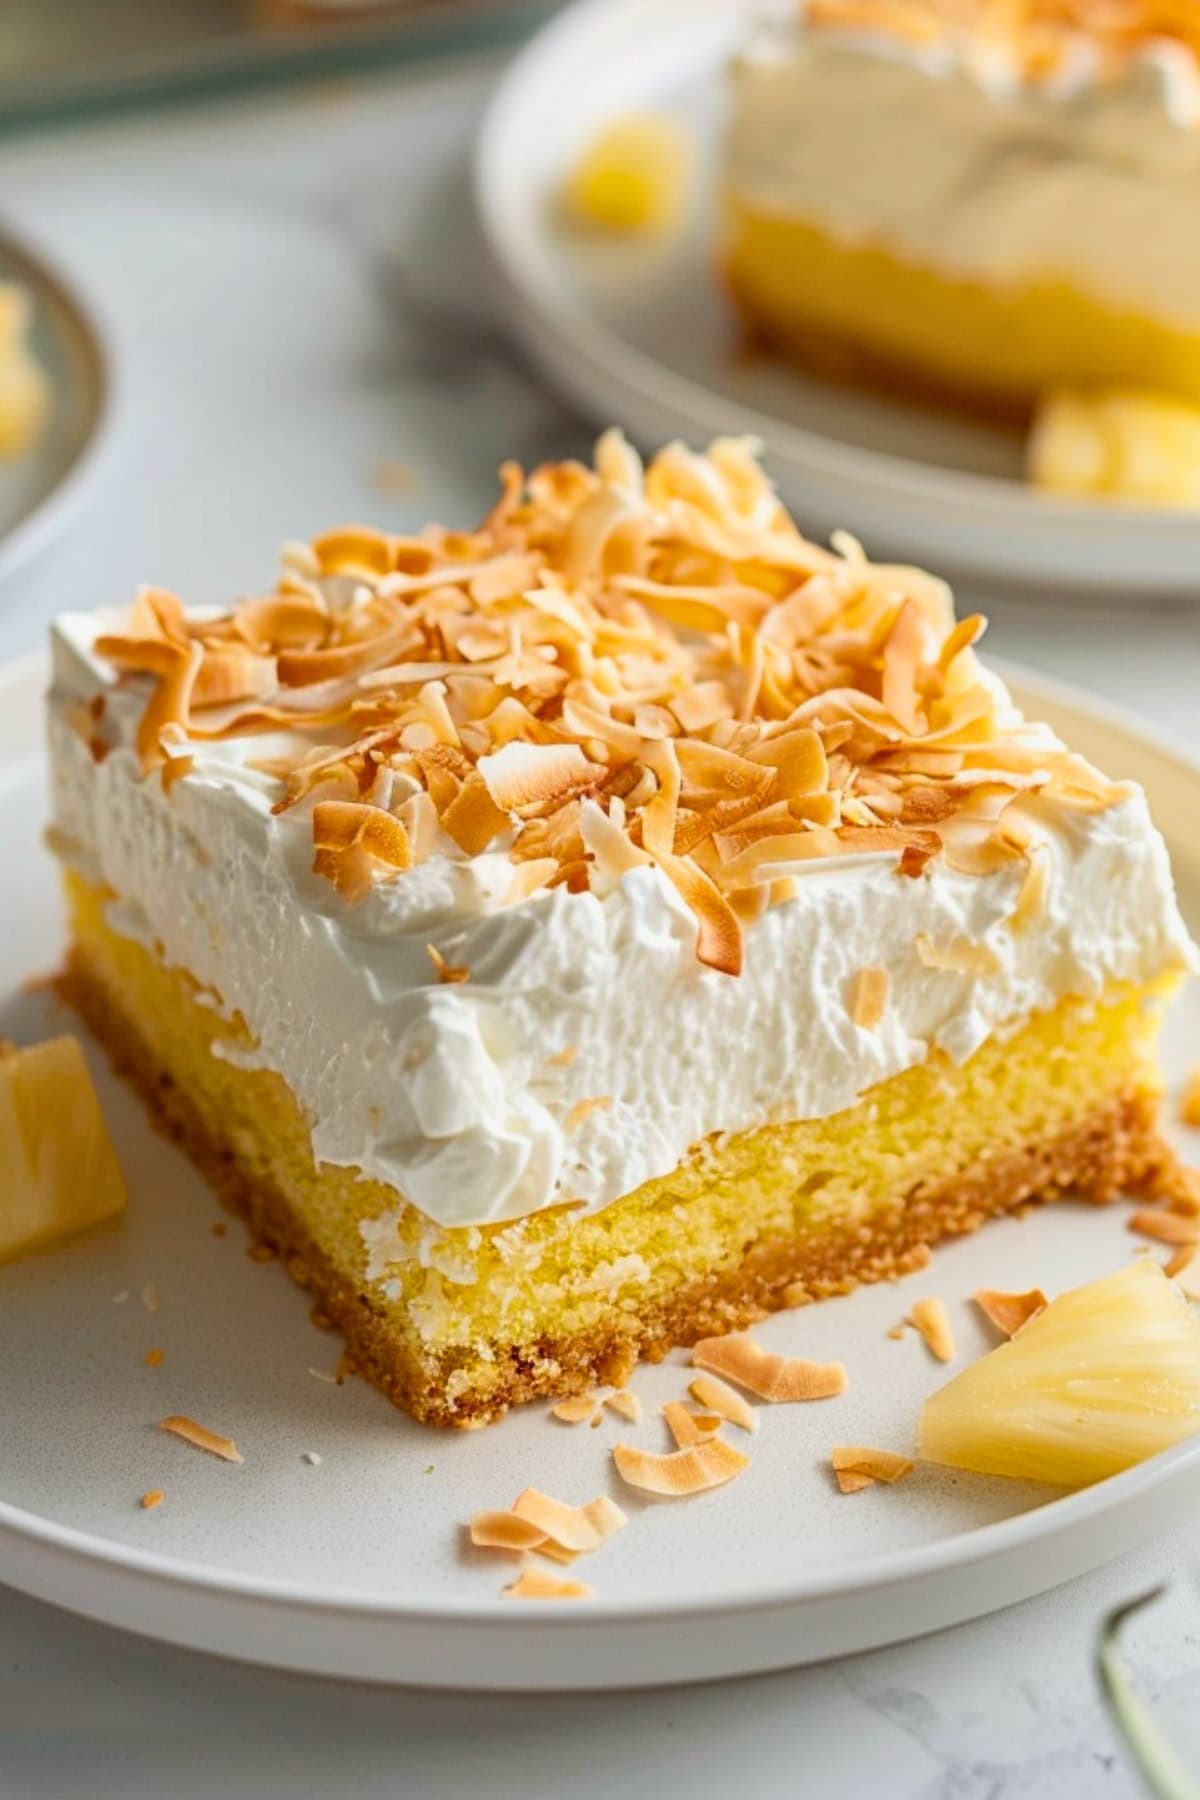 Slice of pina colada poke cake with whipped cream, garnished with toasted coconut on top.